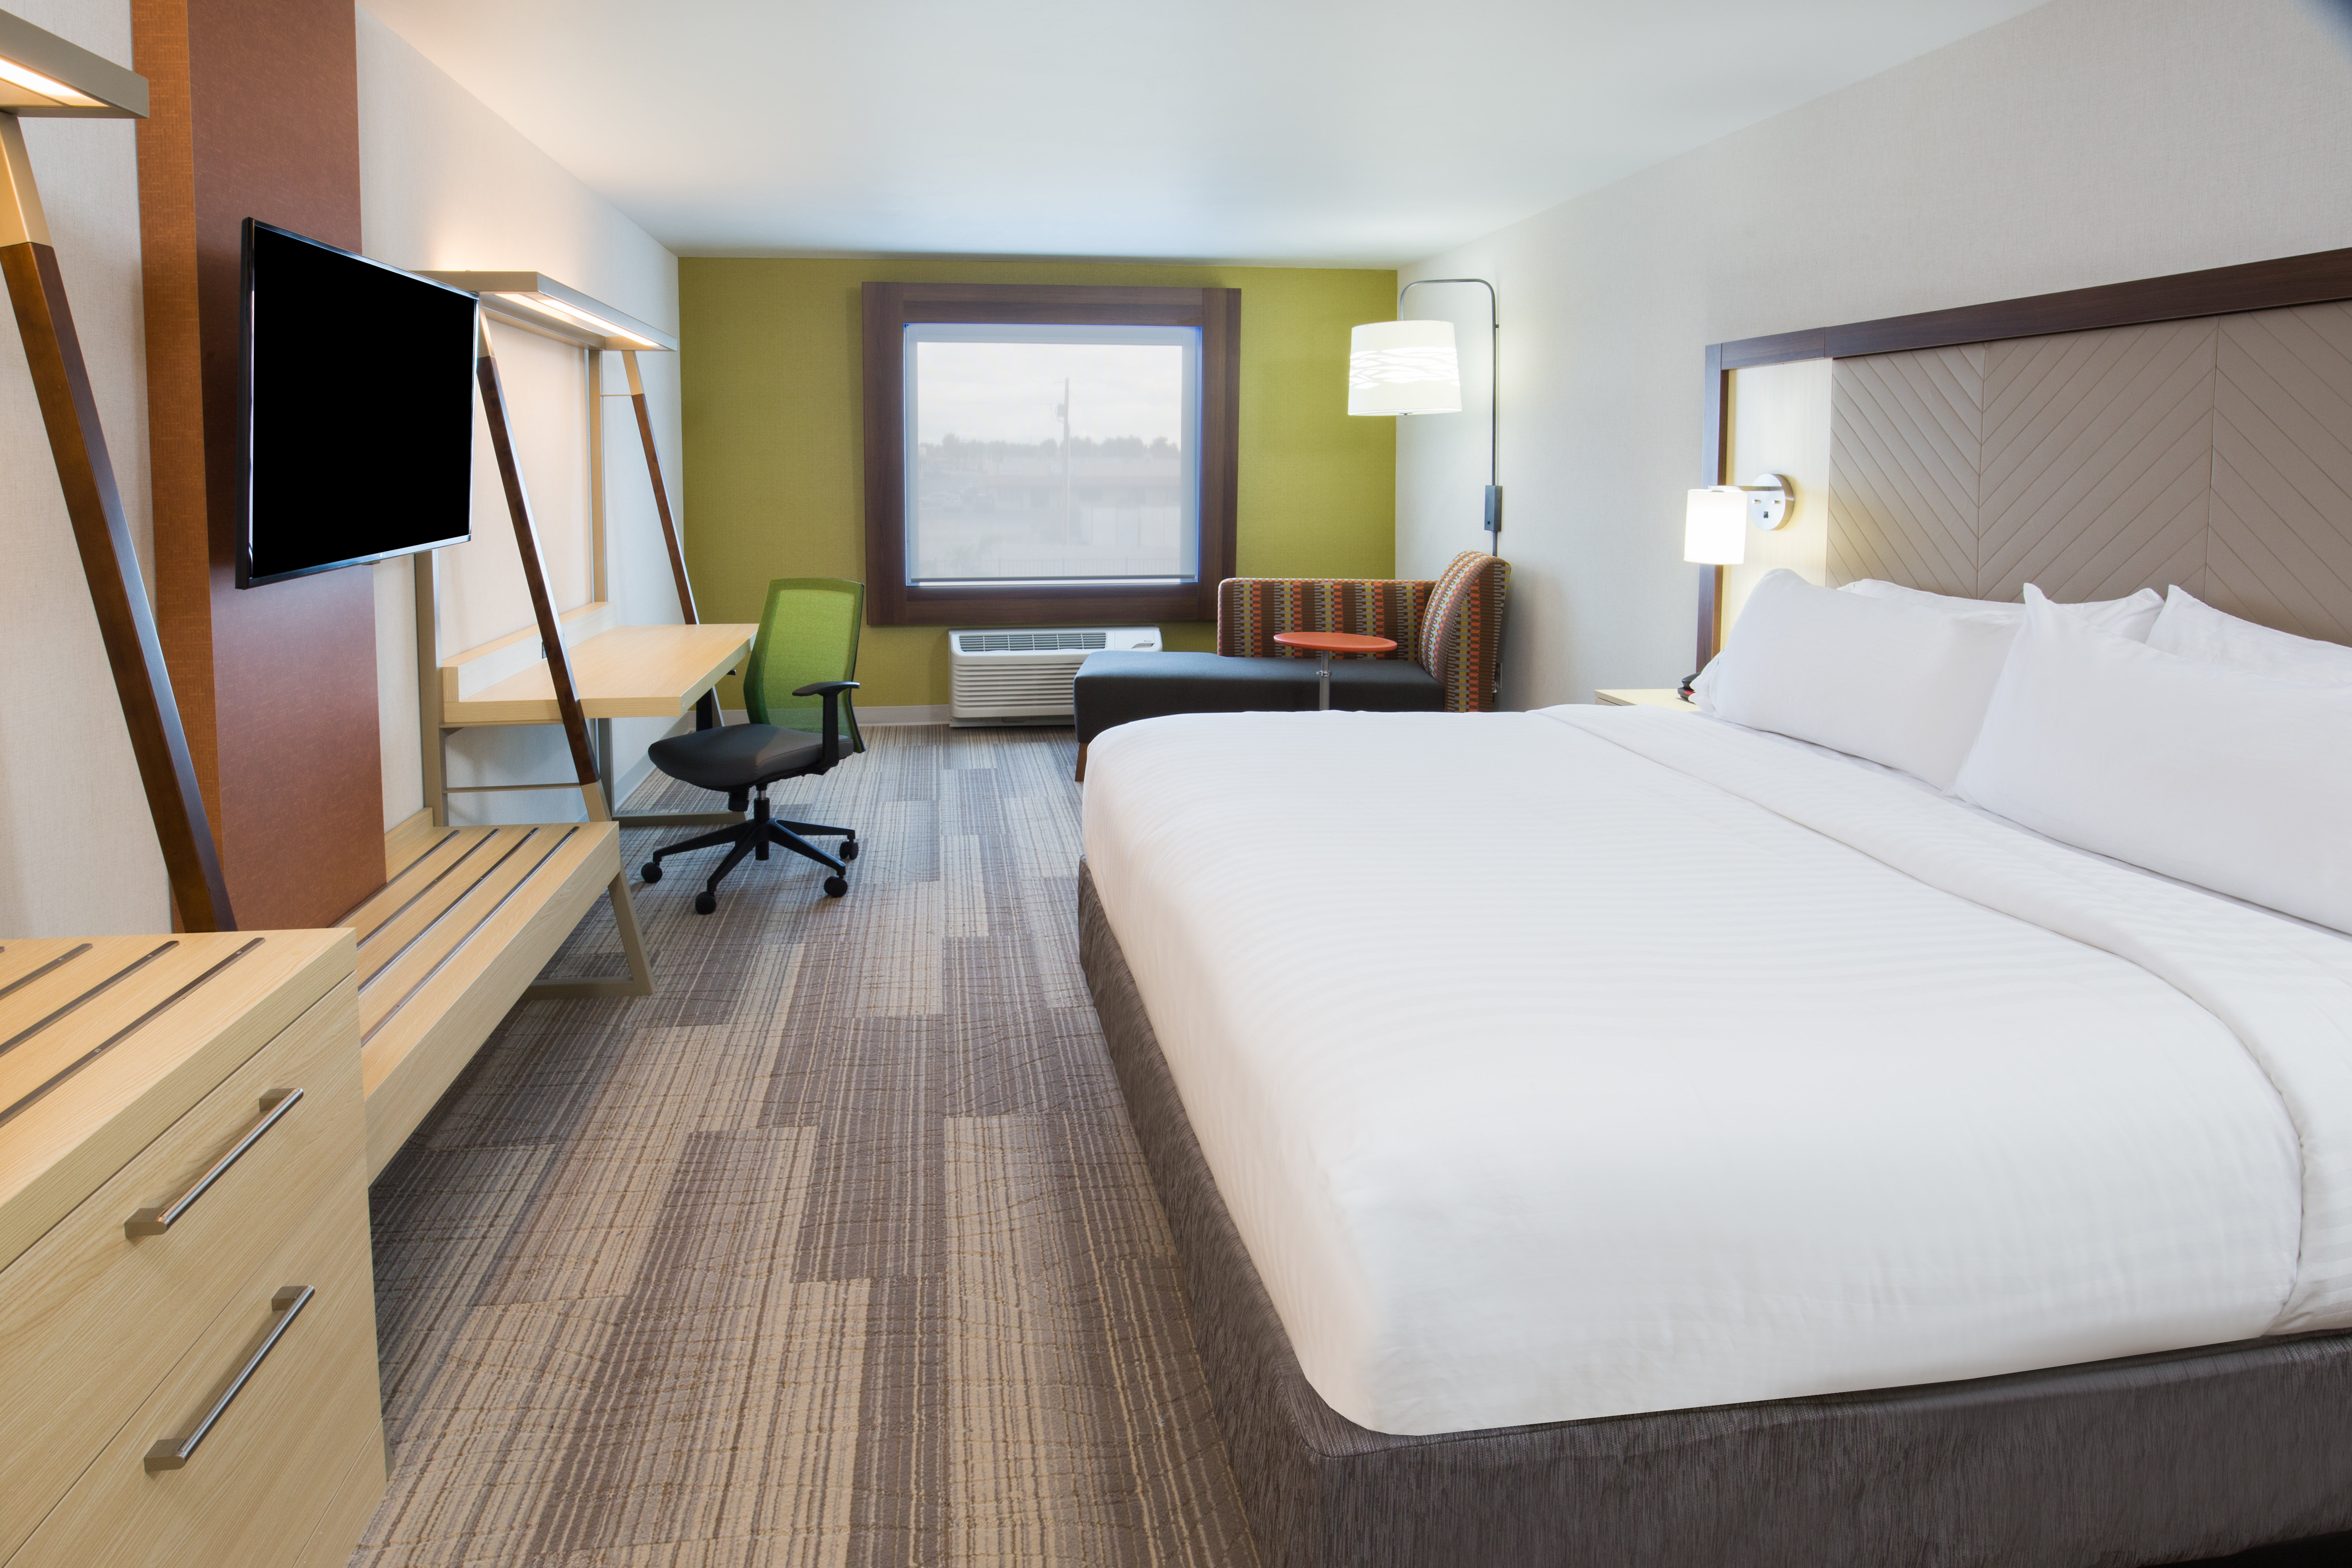 Relax and get your work done in our well designed guest rooms